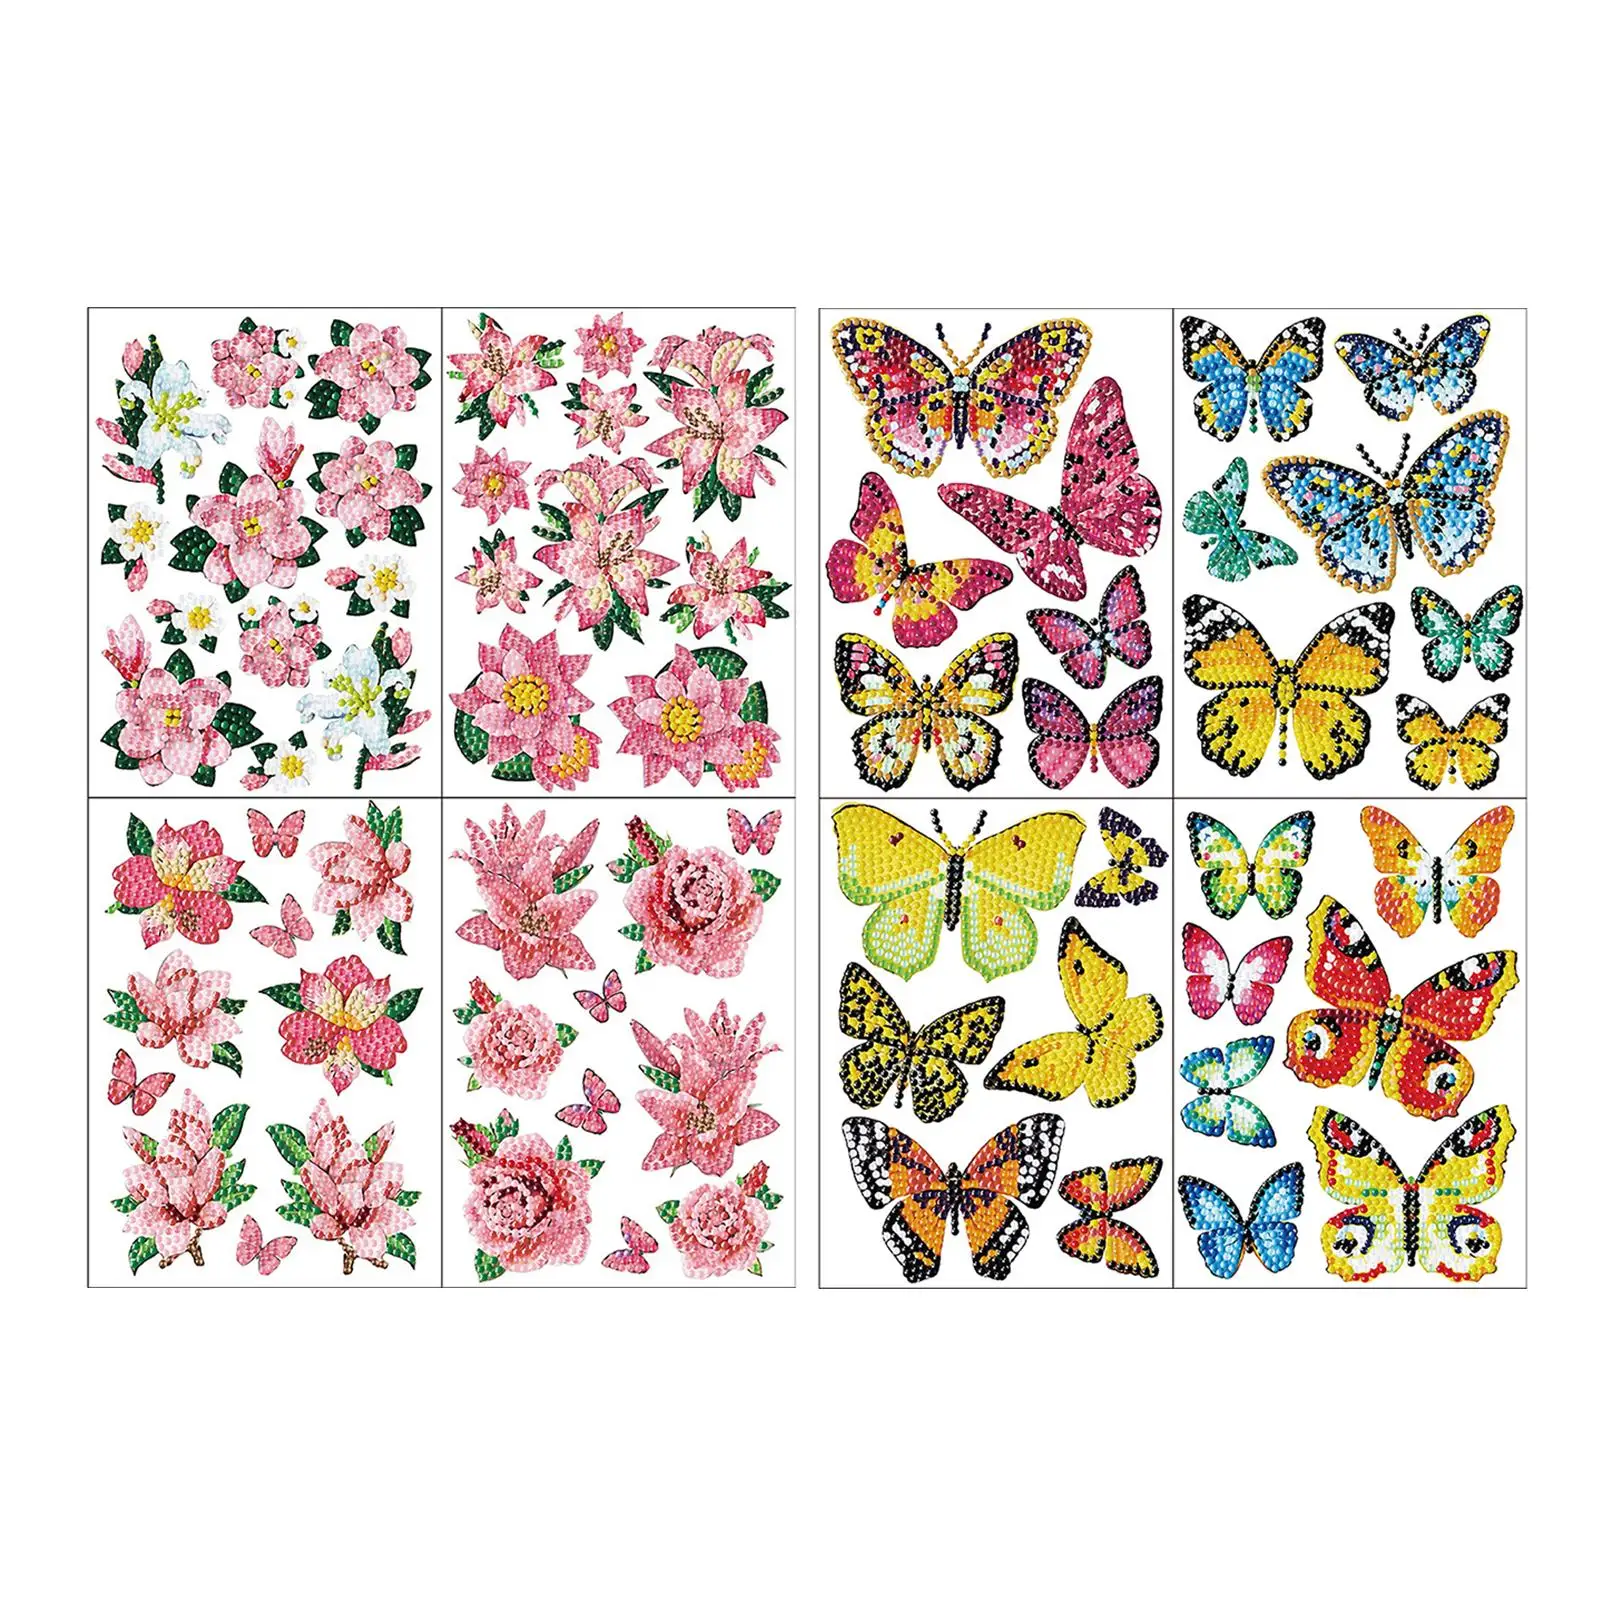 5D DIY Diamond Painting Stickers Set Crafts Embroidery Art Gift Creative for Door Home Birthday Refrigerator